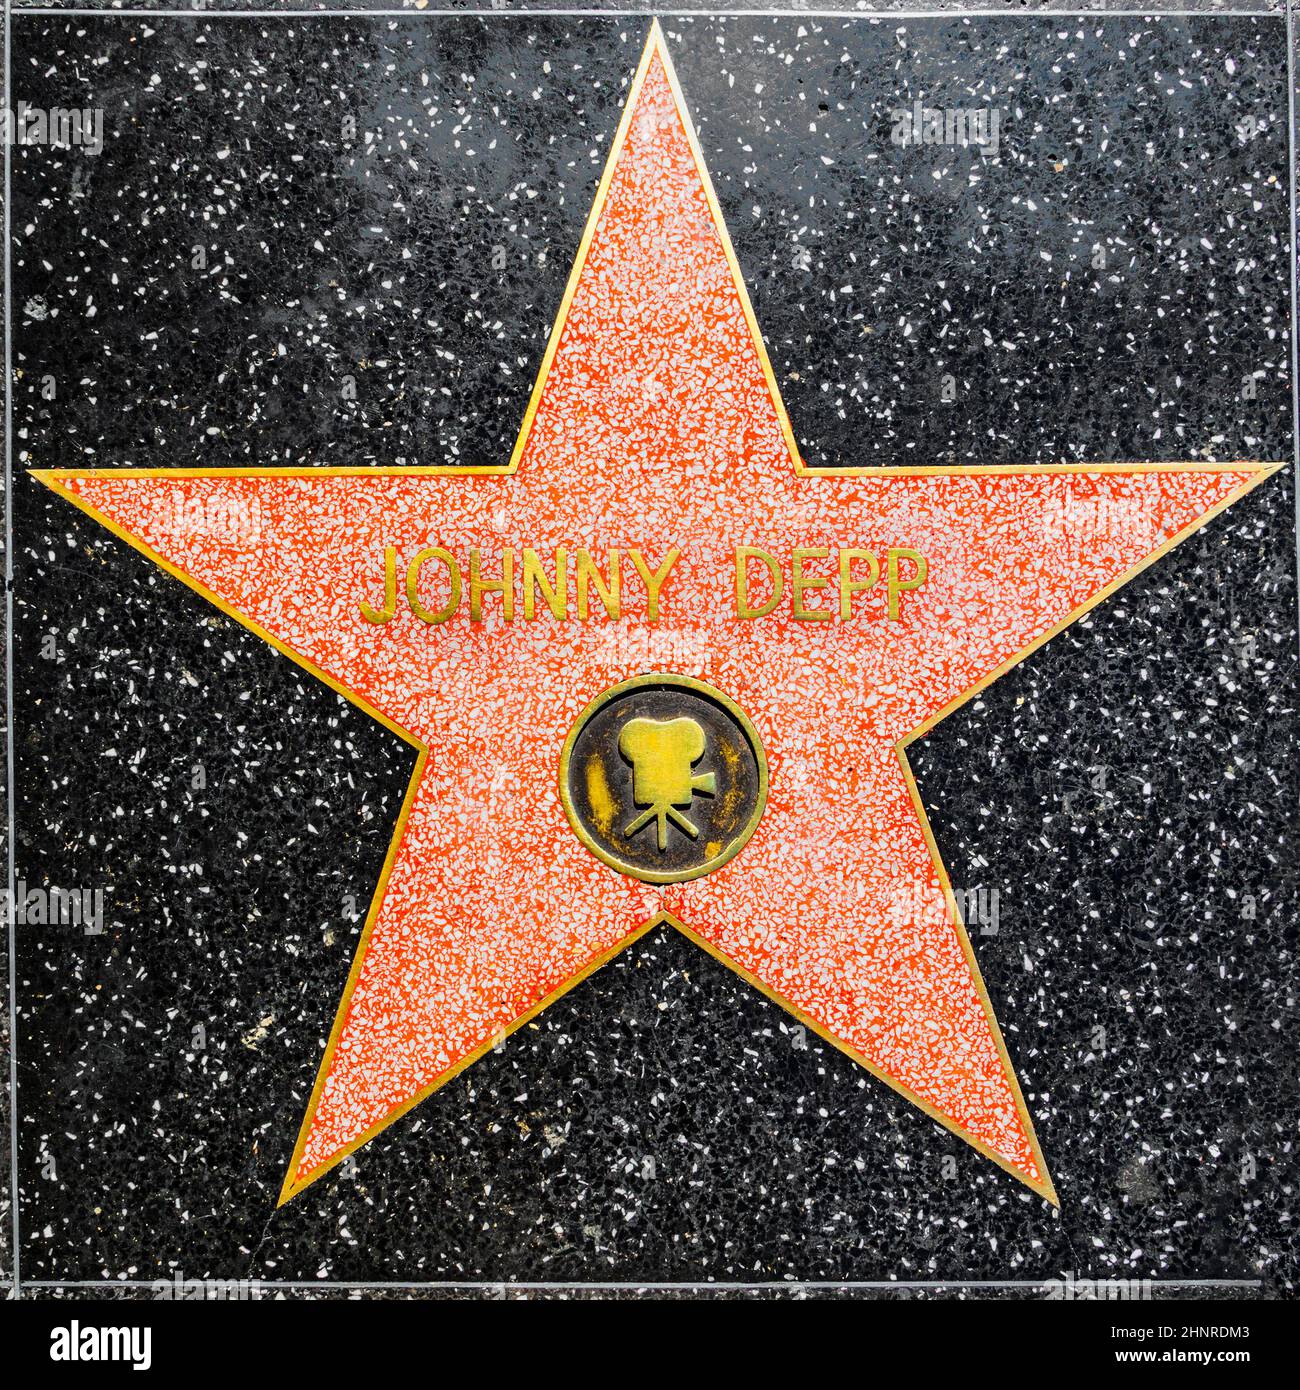 Johnny Depp's star on Hollywood Walk of Fame Stock Photo